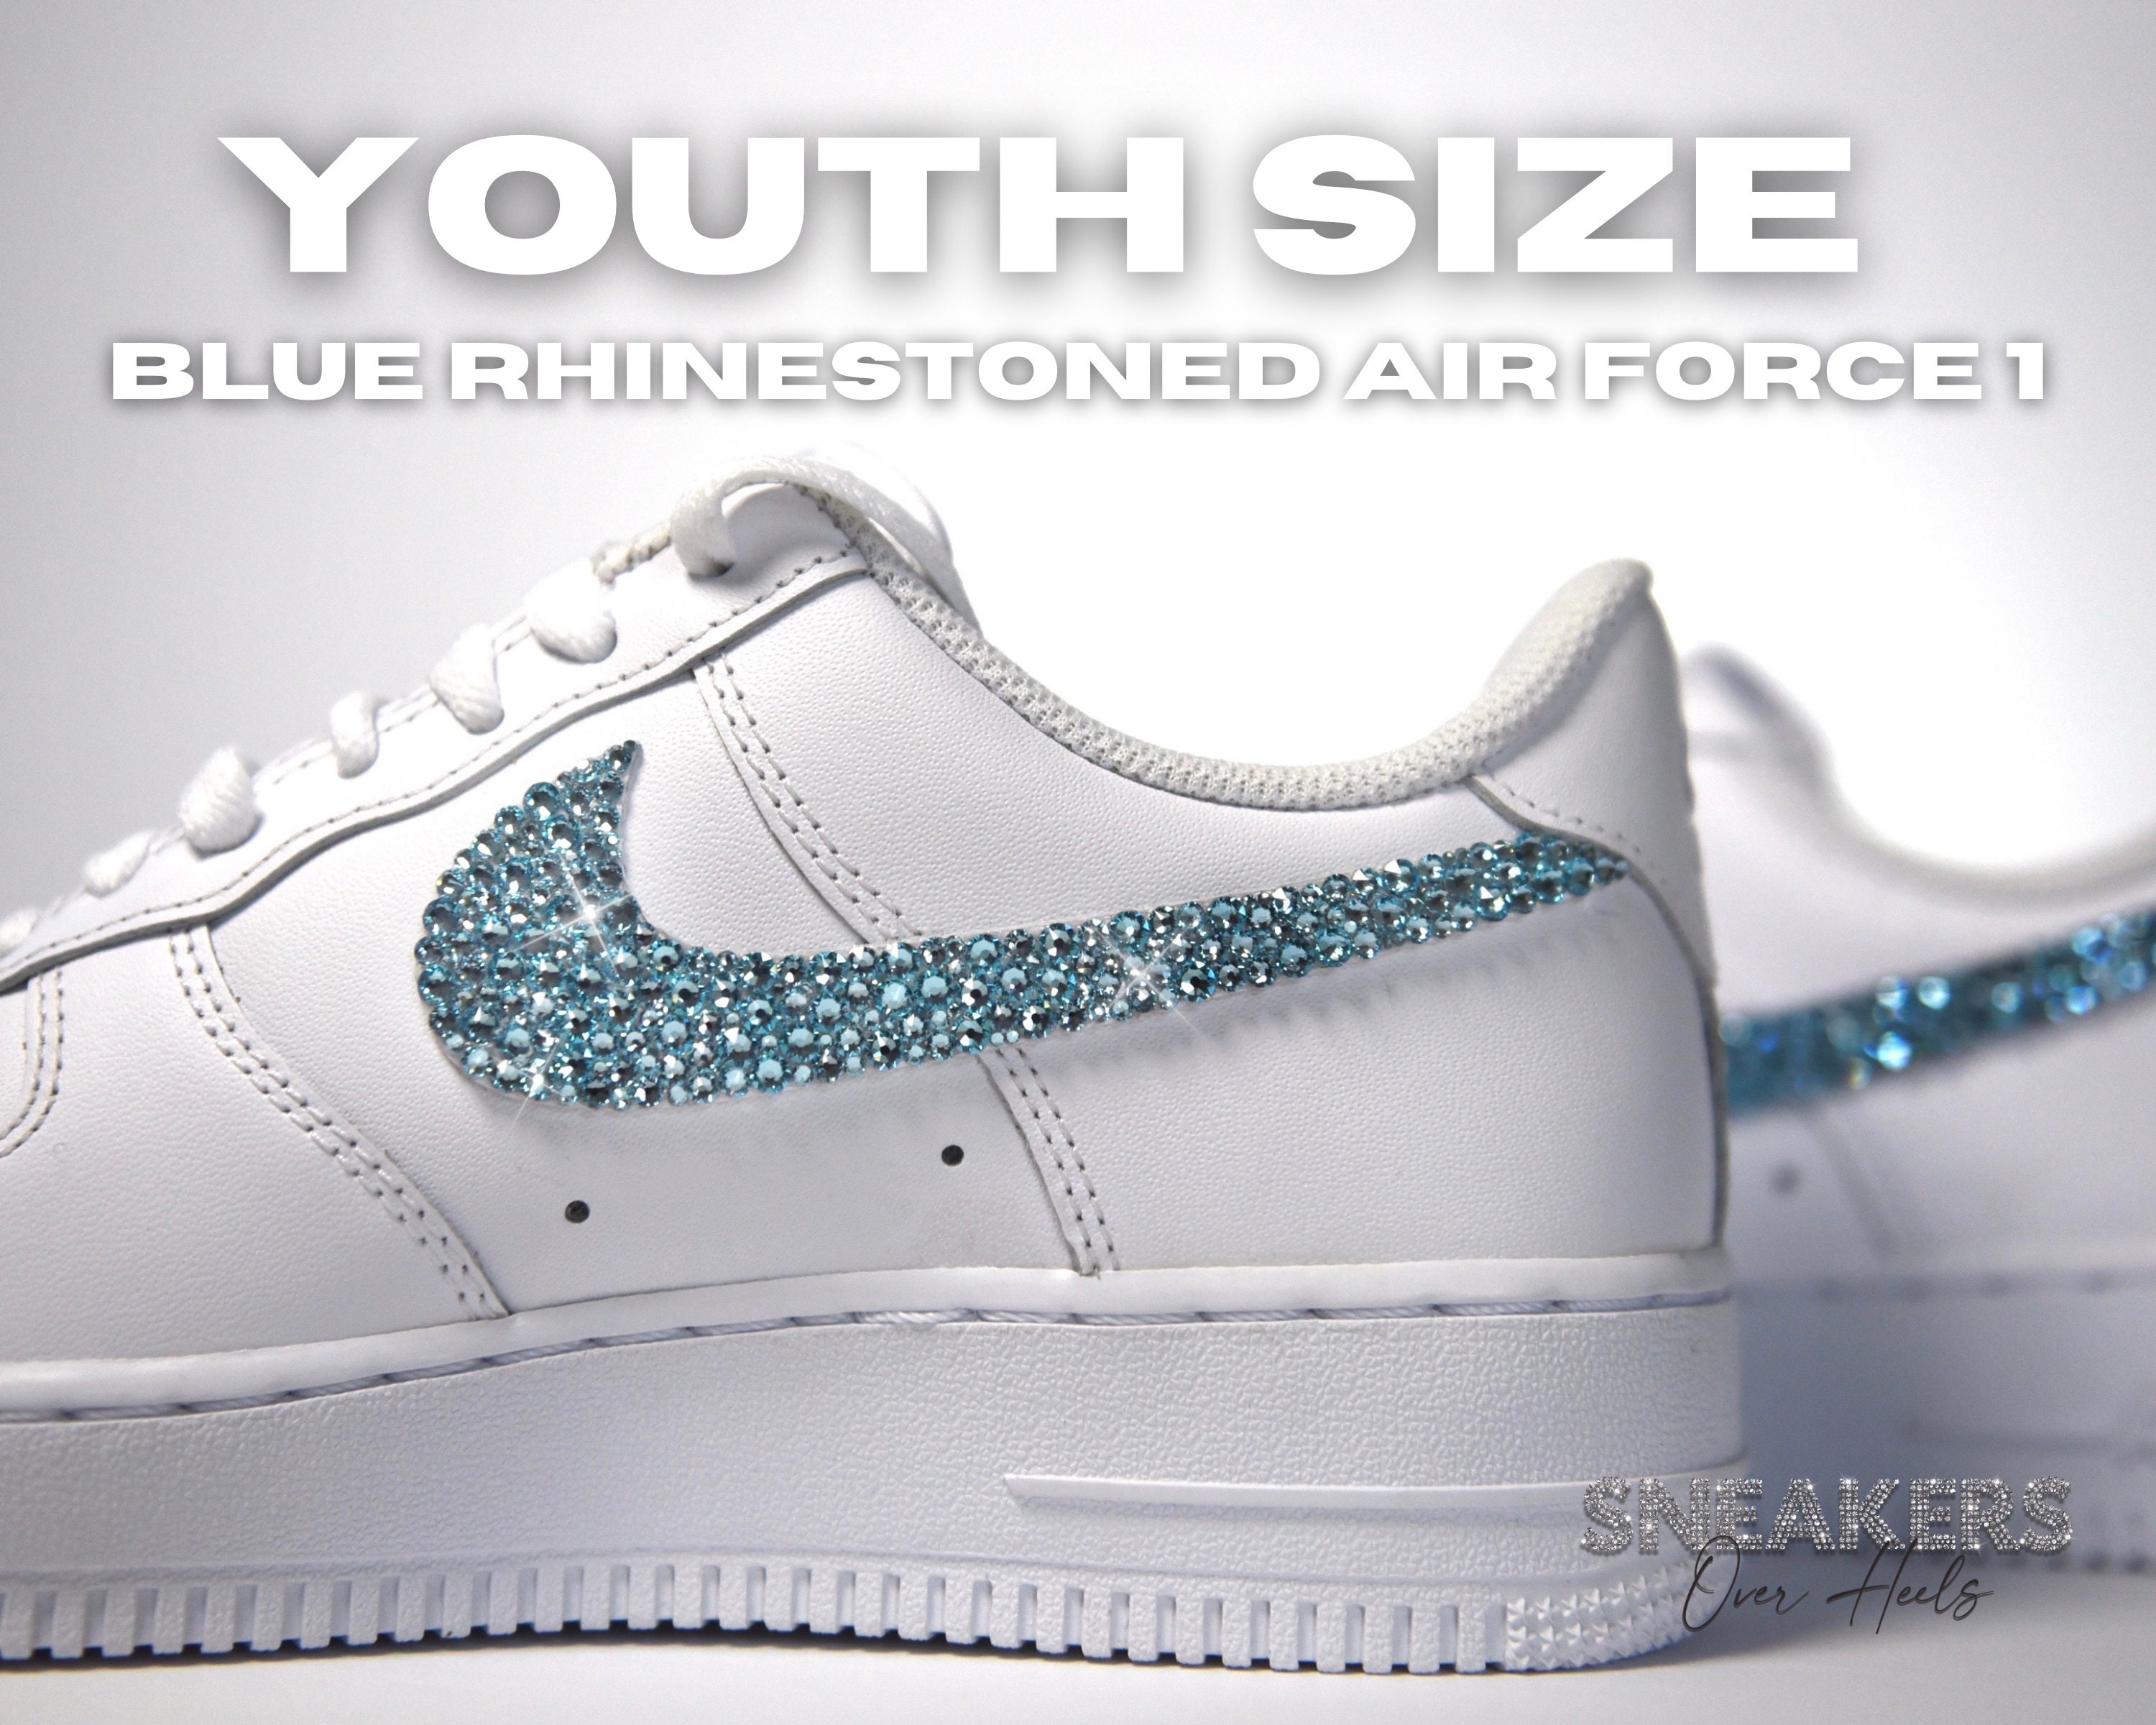 RLCS Custom Air Force 1 Low's by Semaj621. It features a blue